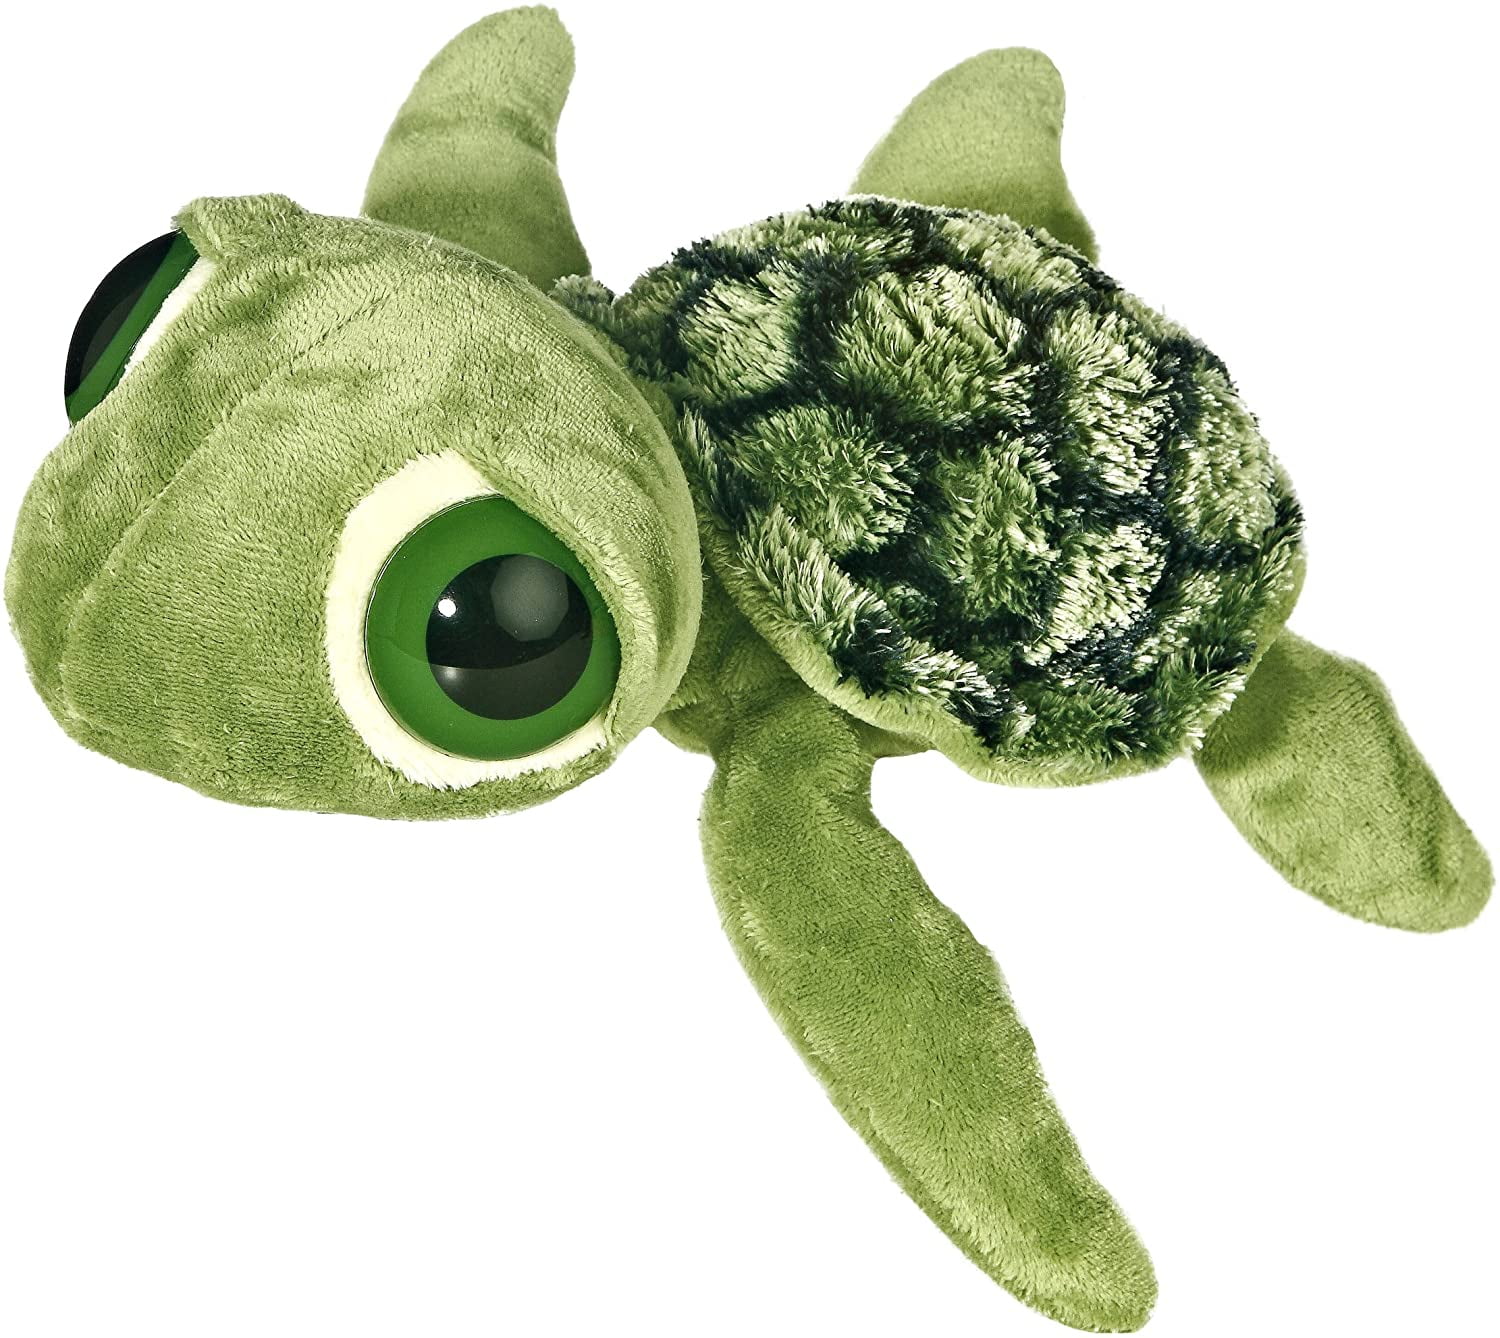 Toti Turtle 13 Stuffed Animal by Douglas Cuddle Toys 275 for sale online 